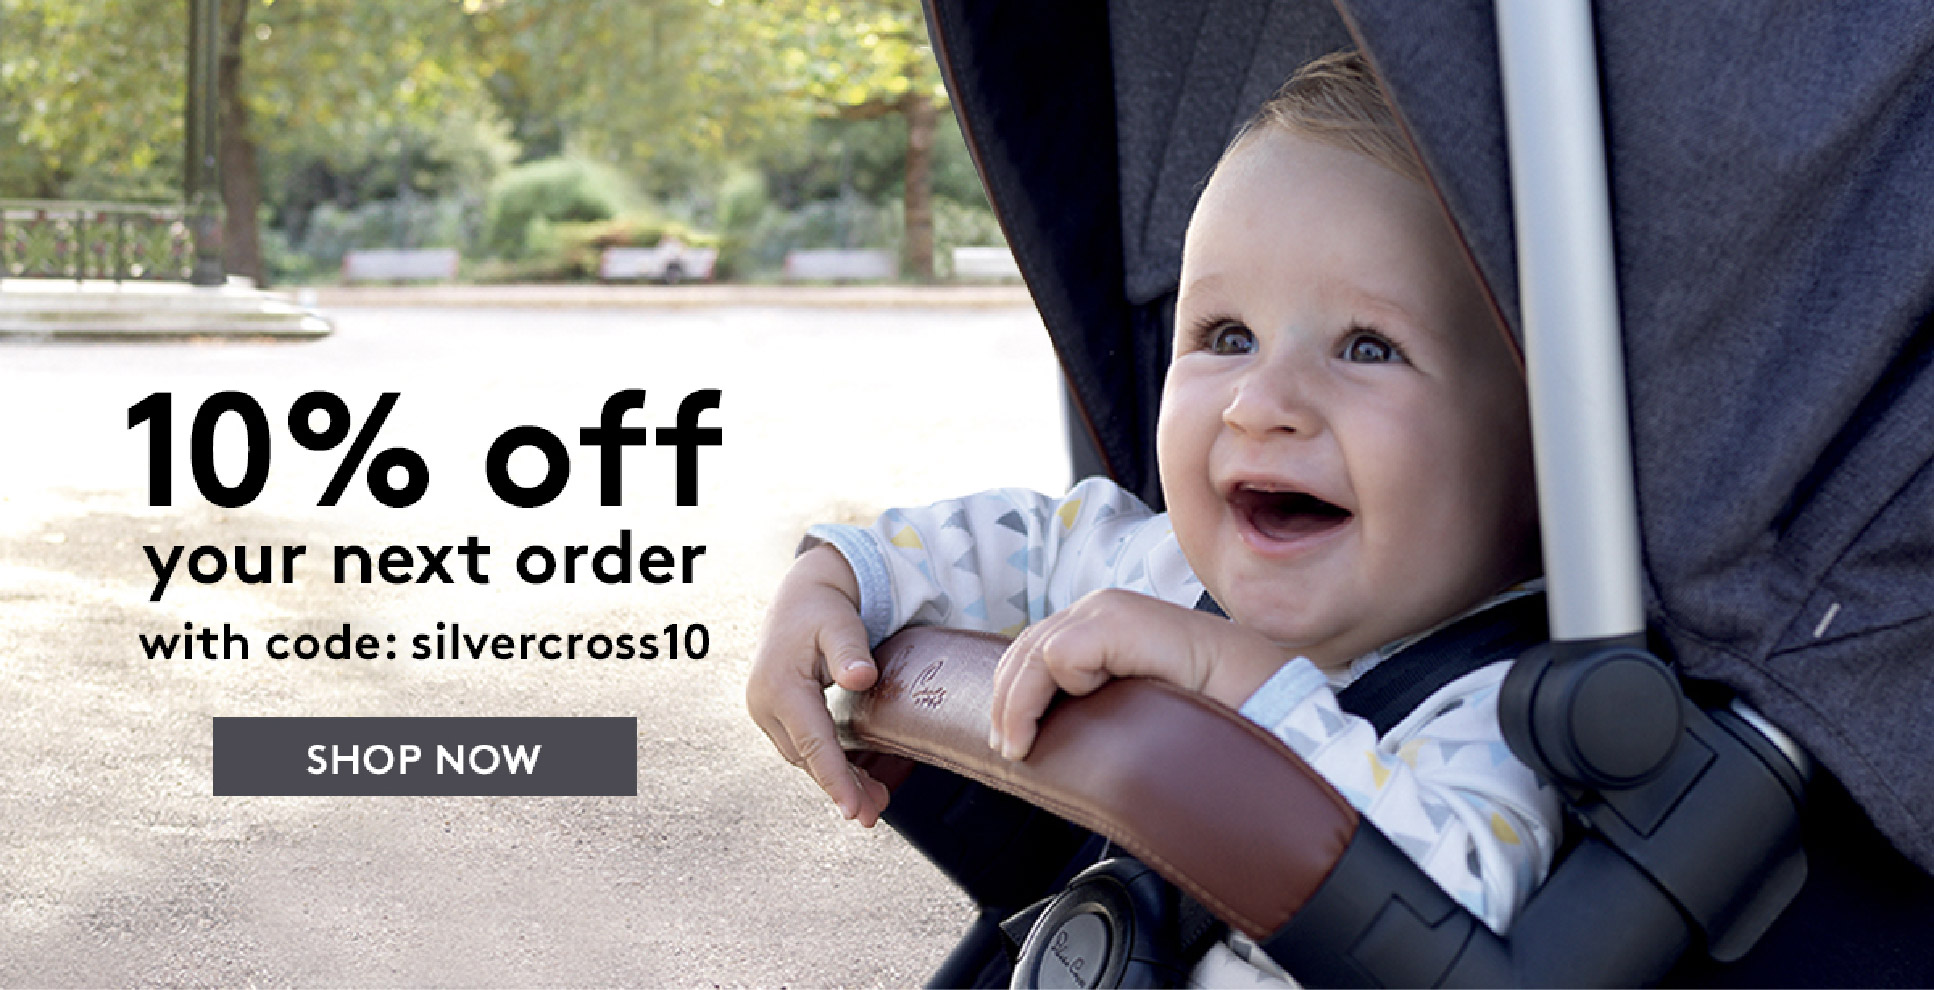 Enjoy 5% off your next order with code: Silvercross5